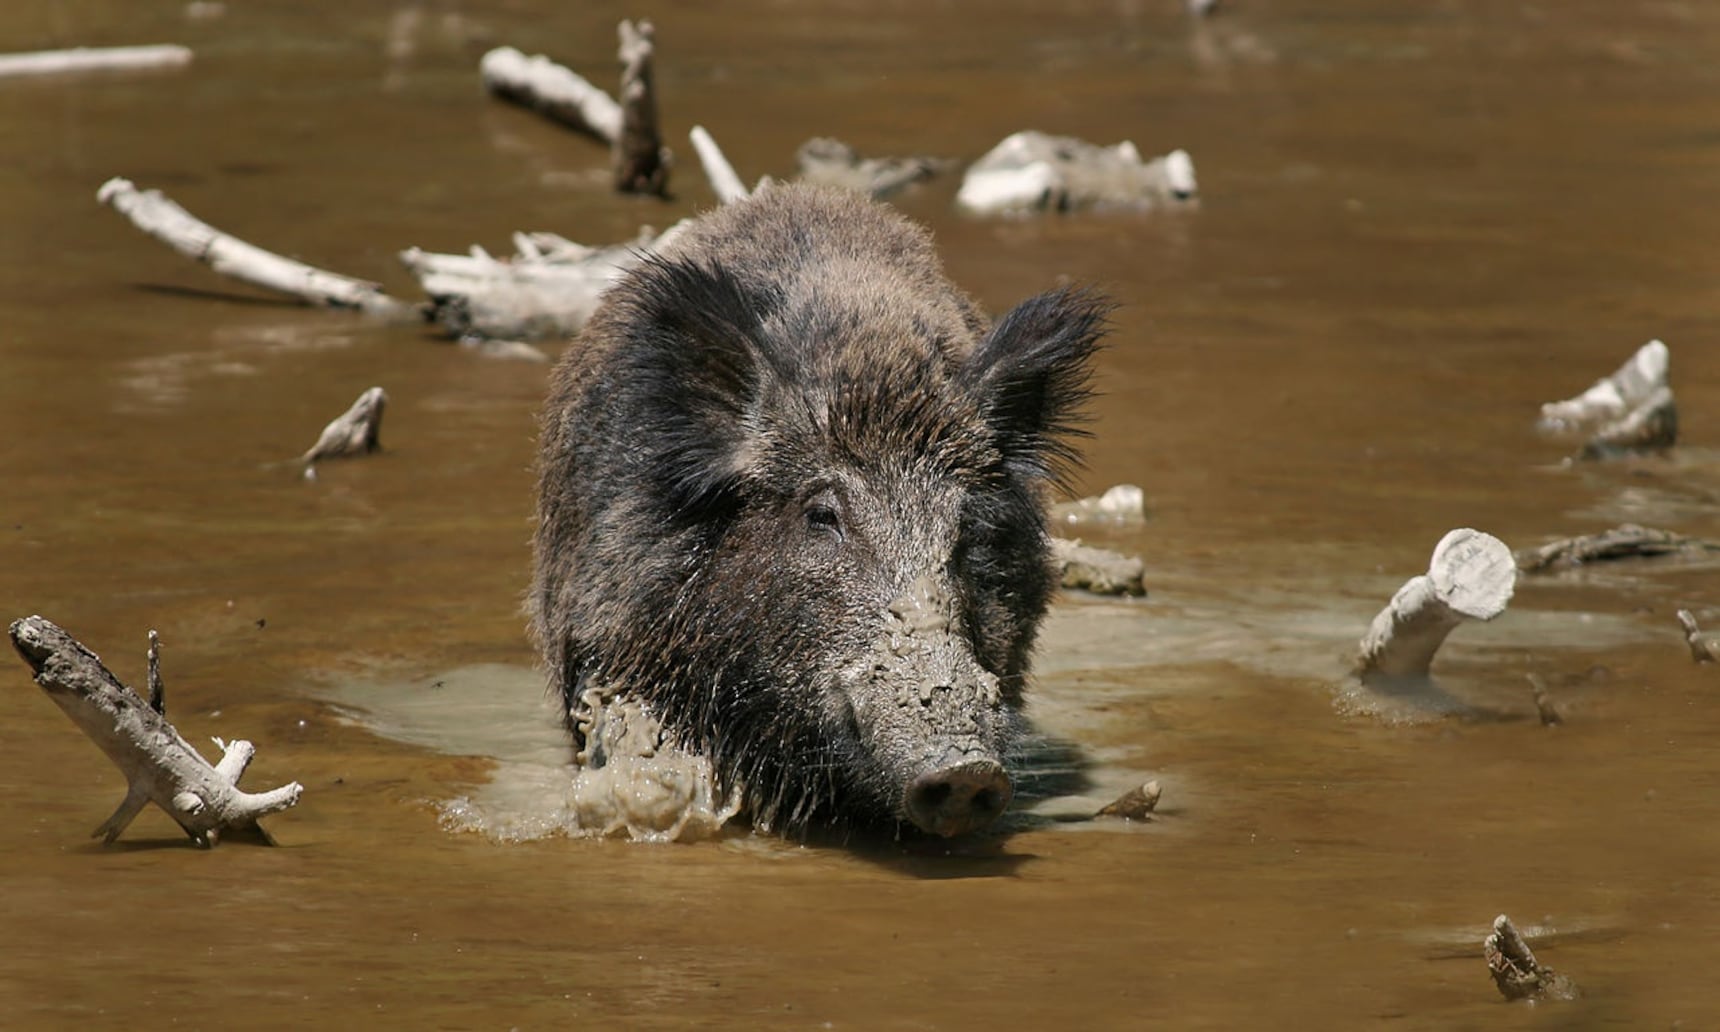 Where Do Wild Boars Outnumber Humans?